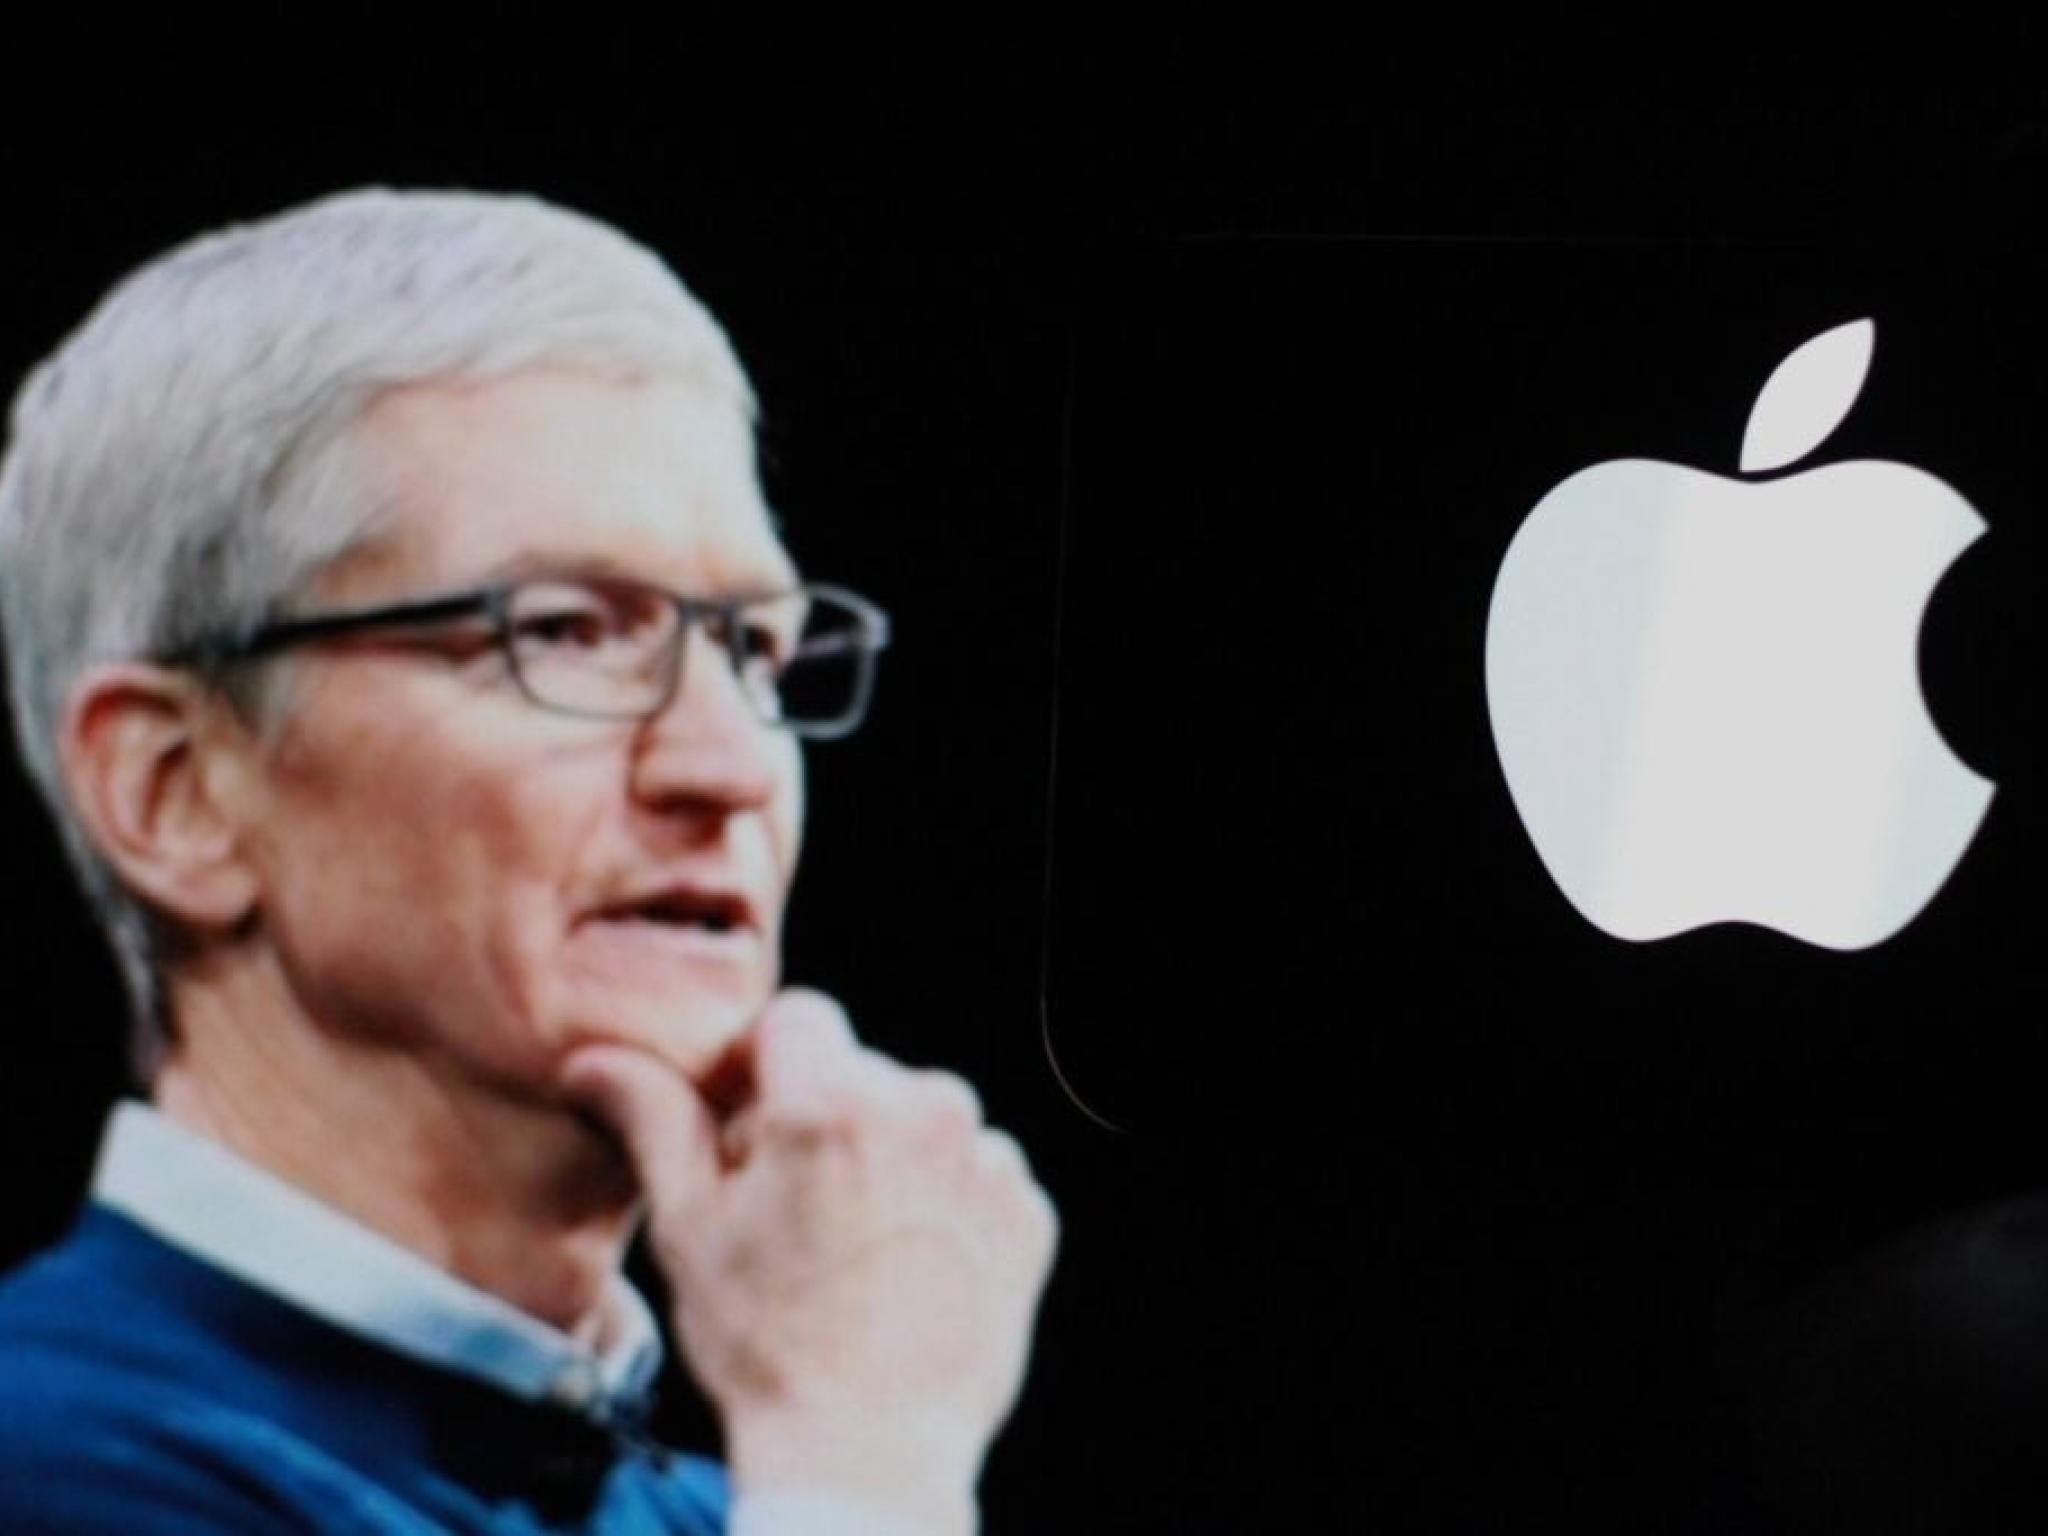  tim-cook-admits-he-has-doubts-about-apples-ability-to-prevent-ai-hallucinations-i-would-never-claim-that-its-100 